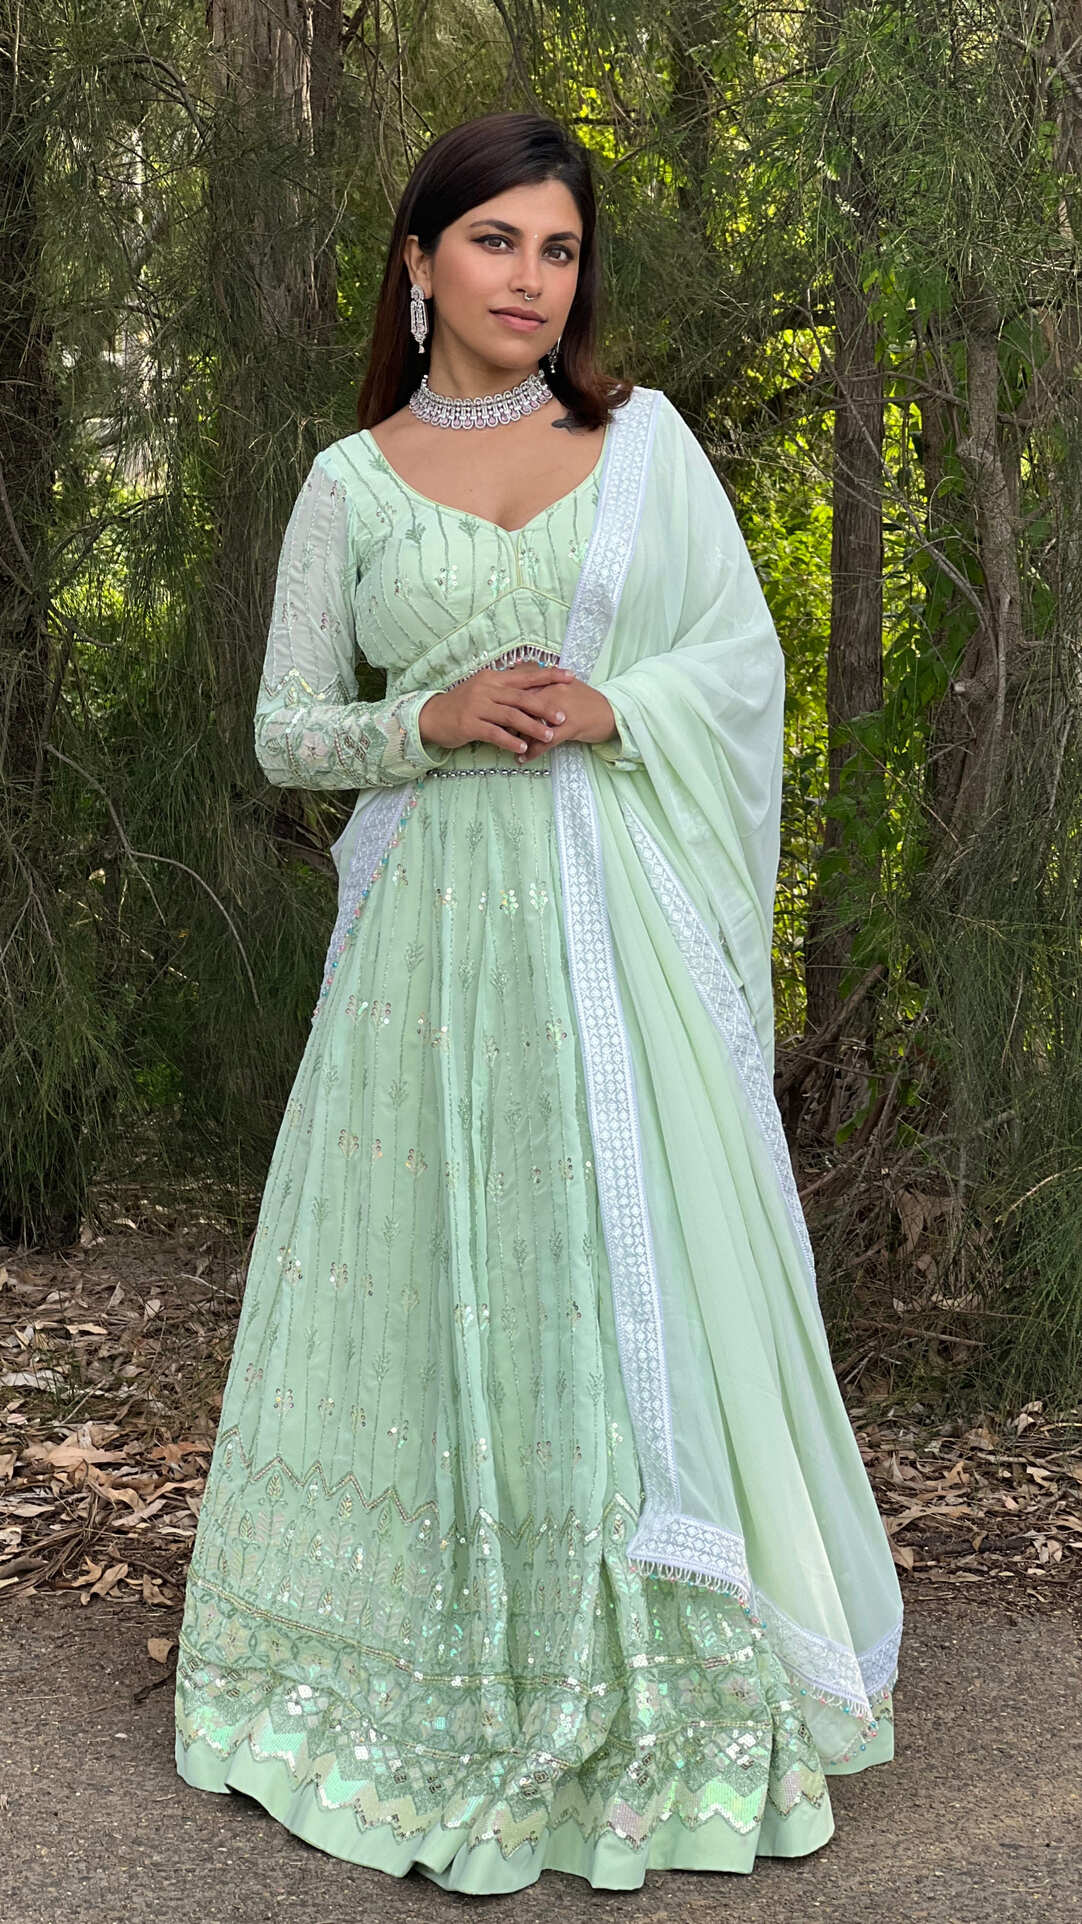 Sea Mist Green Handwork Thread Embroidered Lehenga with Boutique Blouse and Dupatta